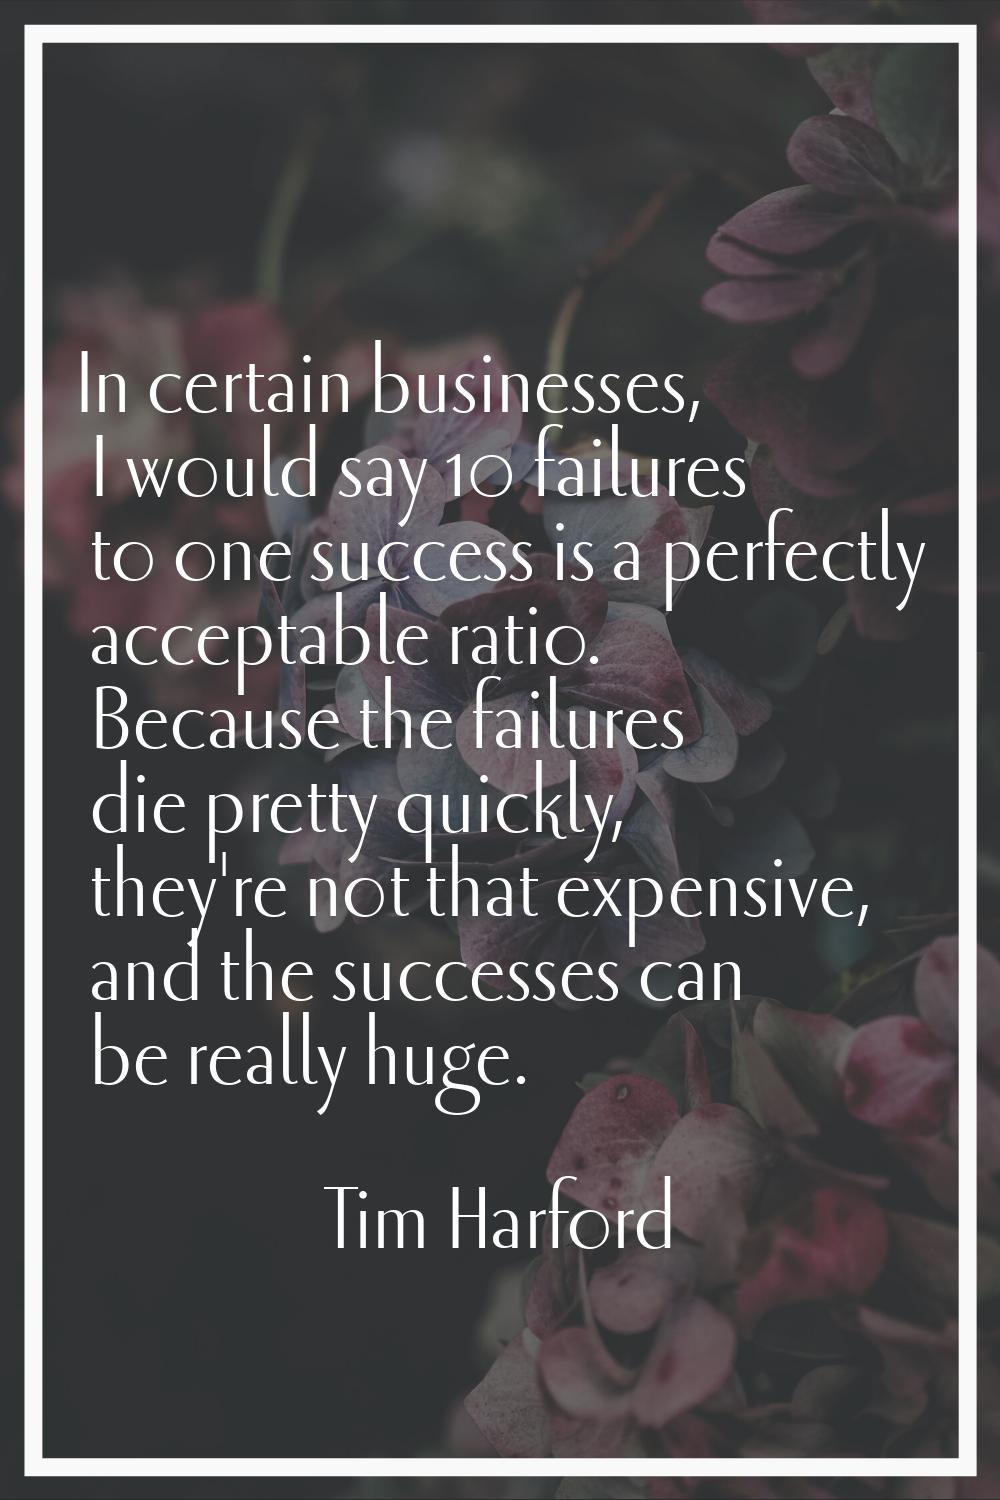 In certain businesses, I would say 10 failures to one success is a perfectly acceptable ratio. Beca